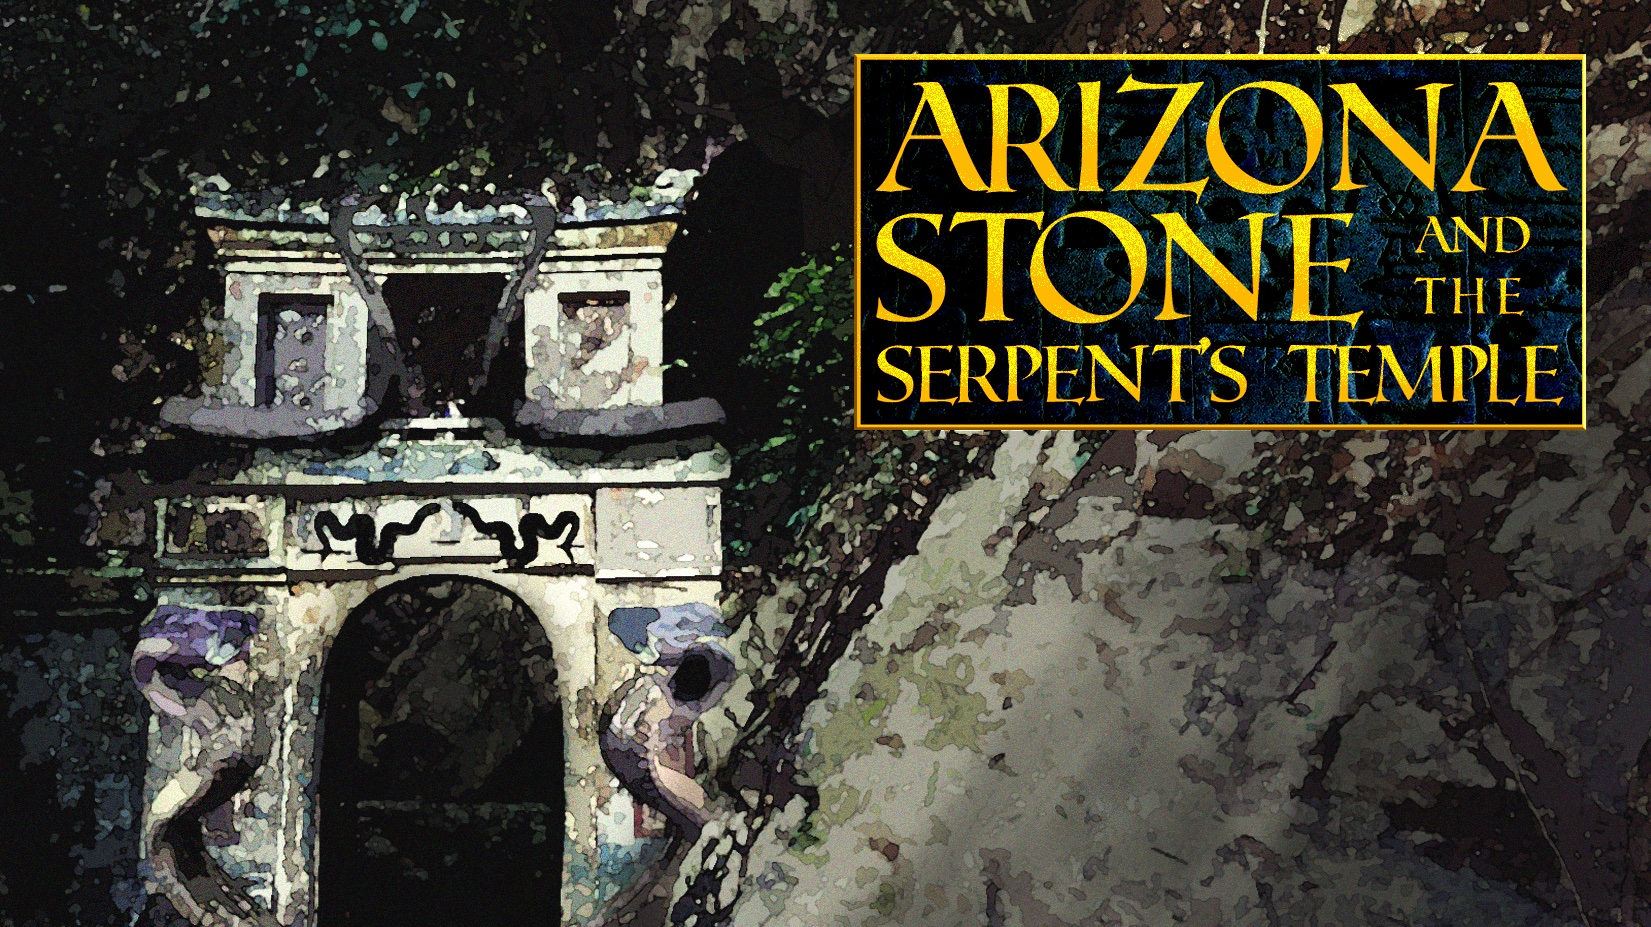 Arizona Stone and the Serpent's Temple